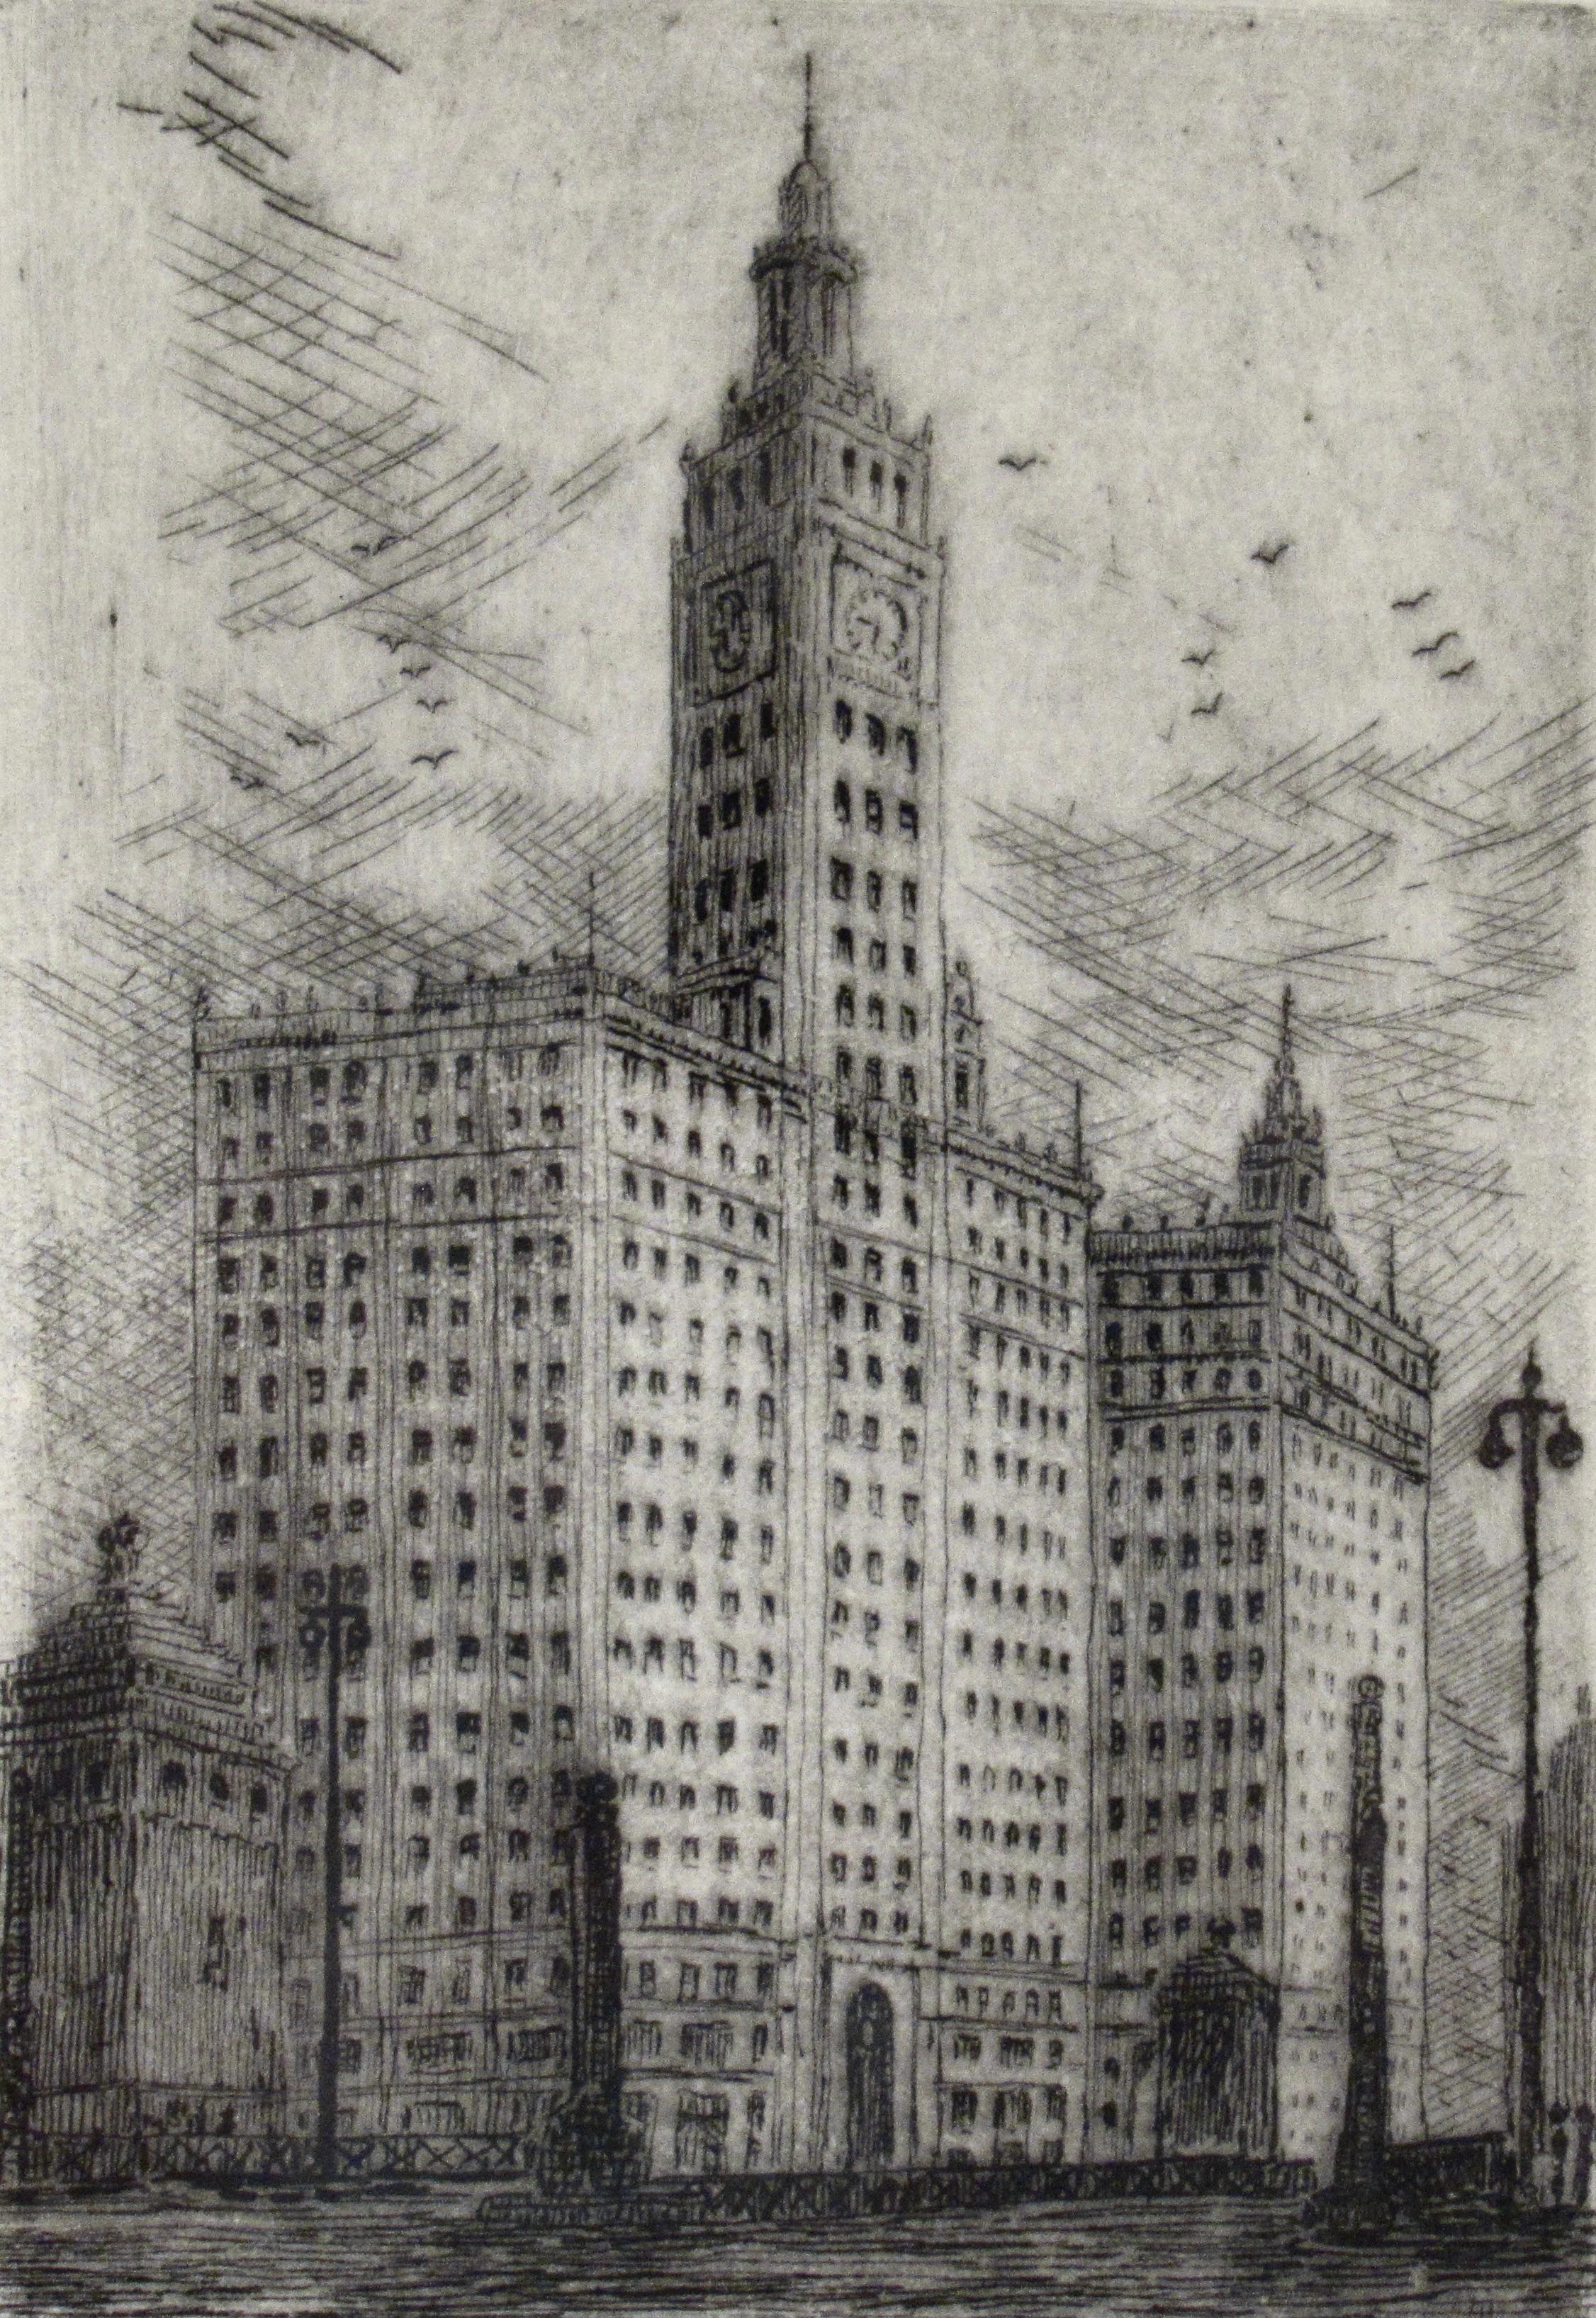 Wrigley Building (Chicago) - American Realist Print by James Swann